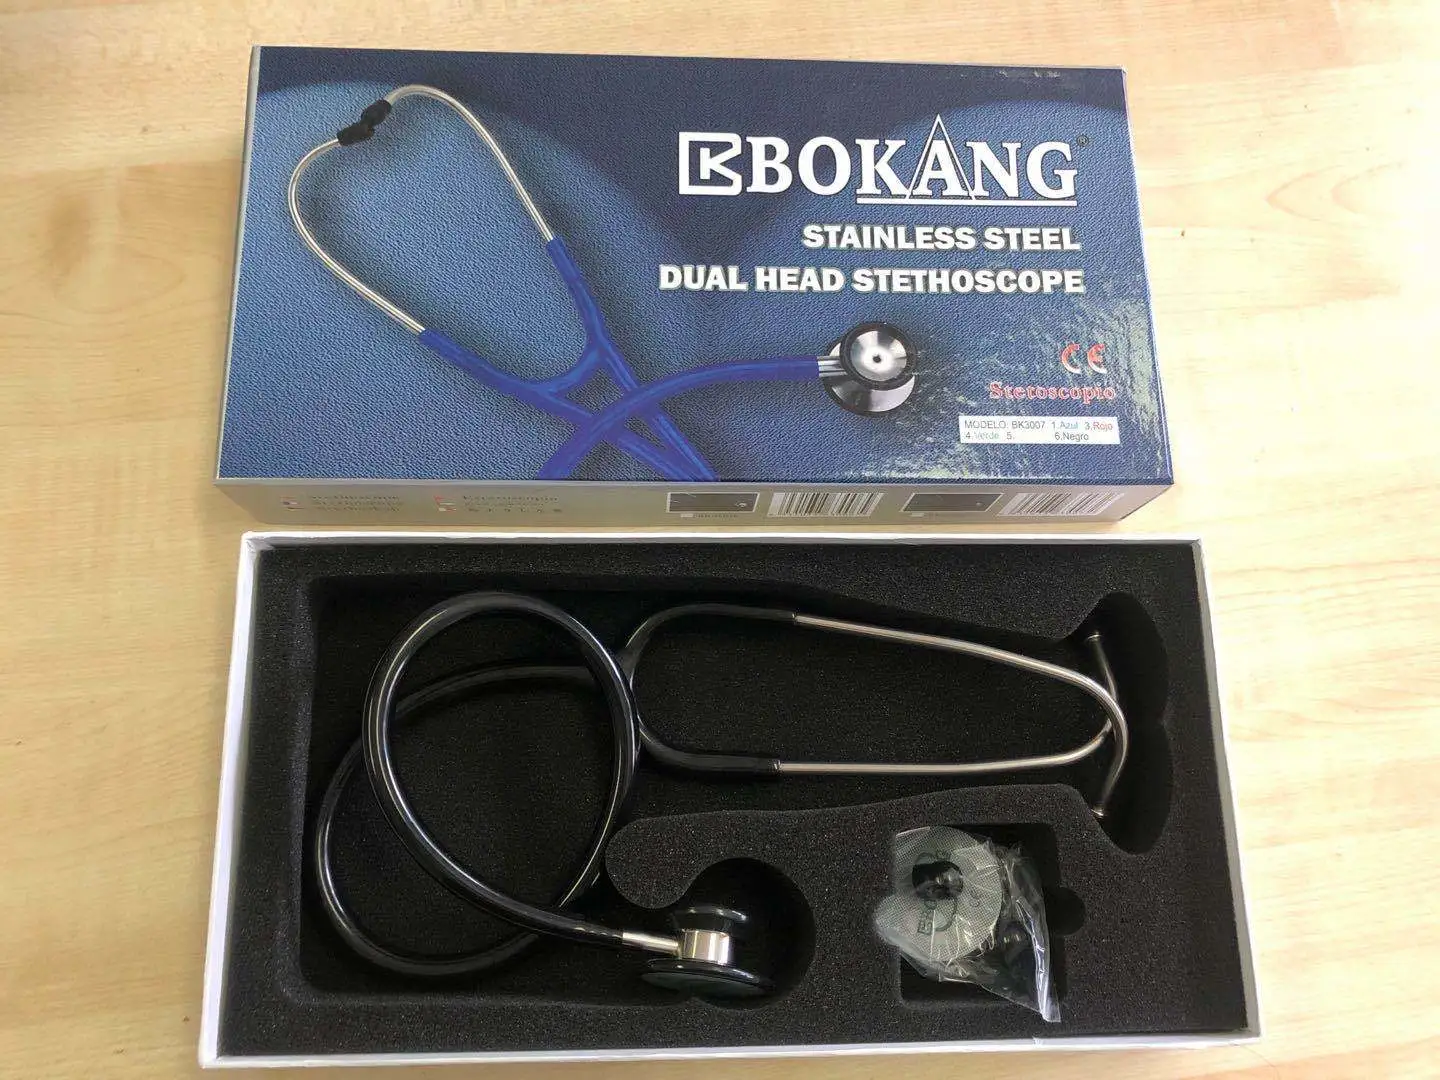 Affordable Stethoscope